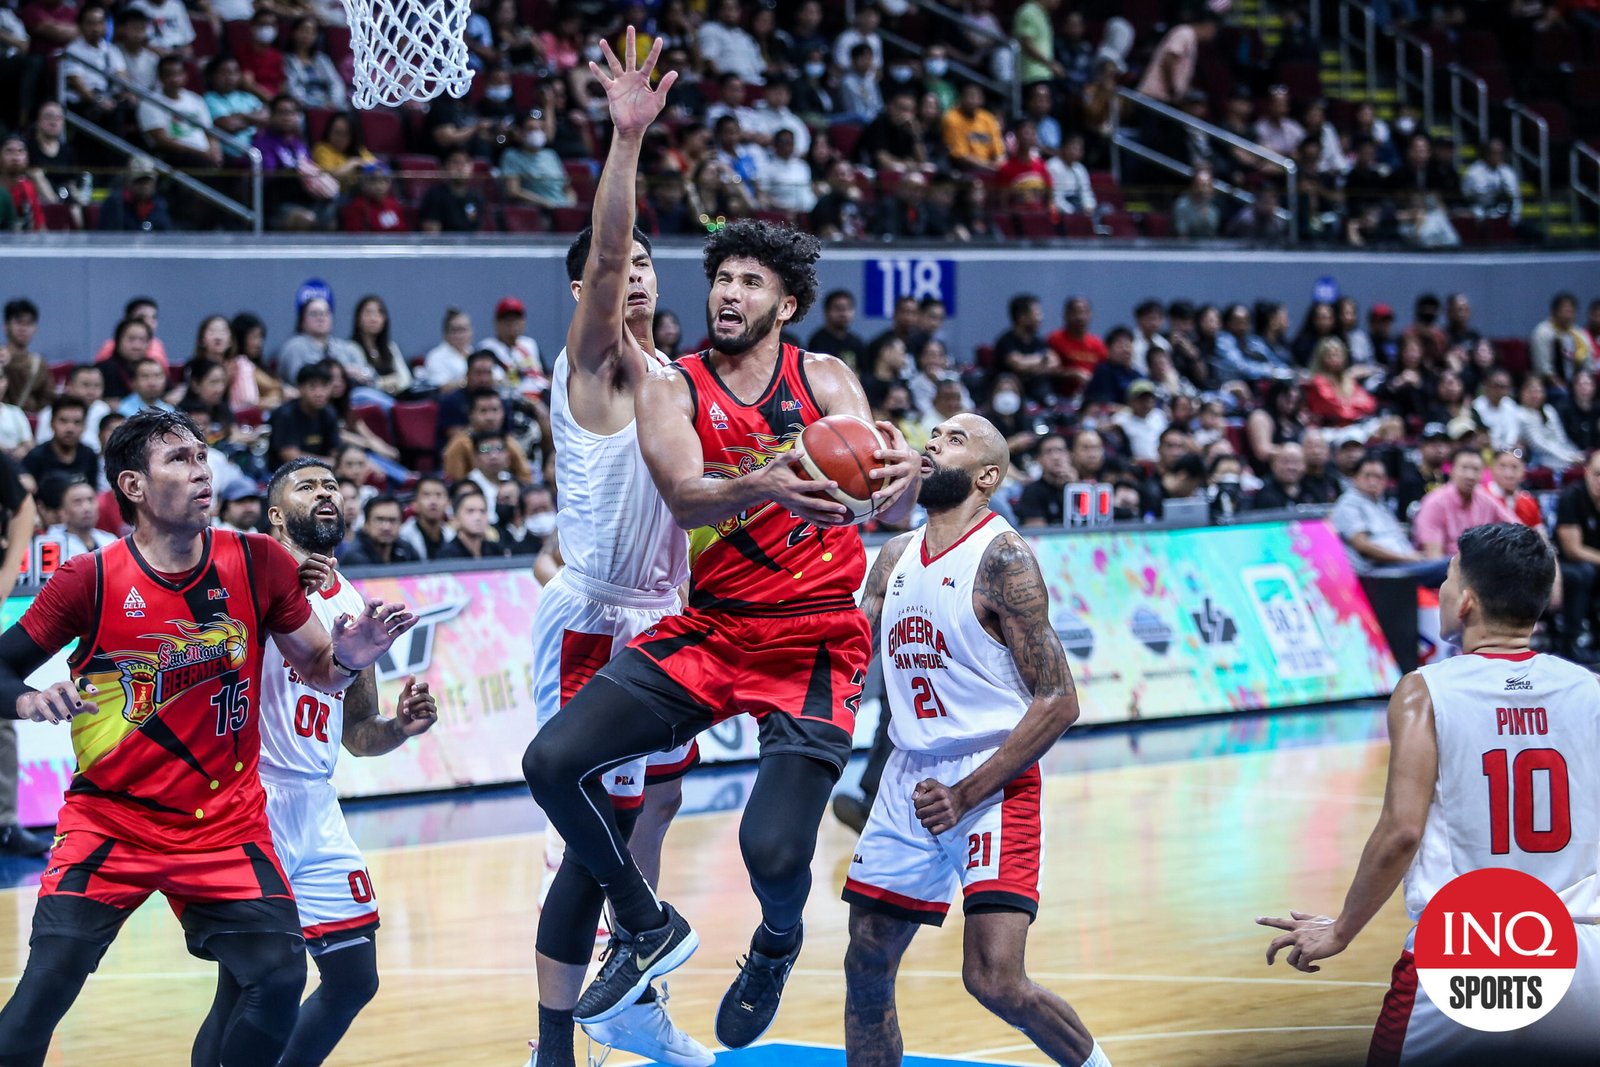 San Miguel pushes Ginebra to brink of exit in PBA semis